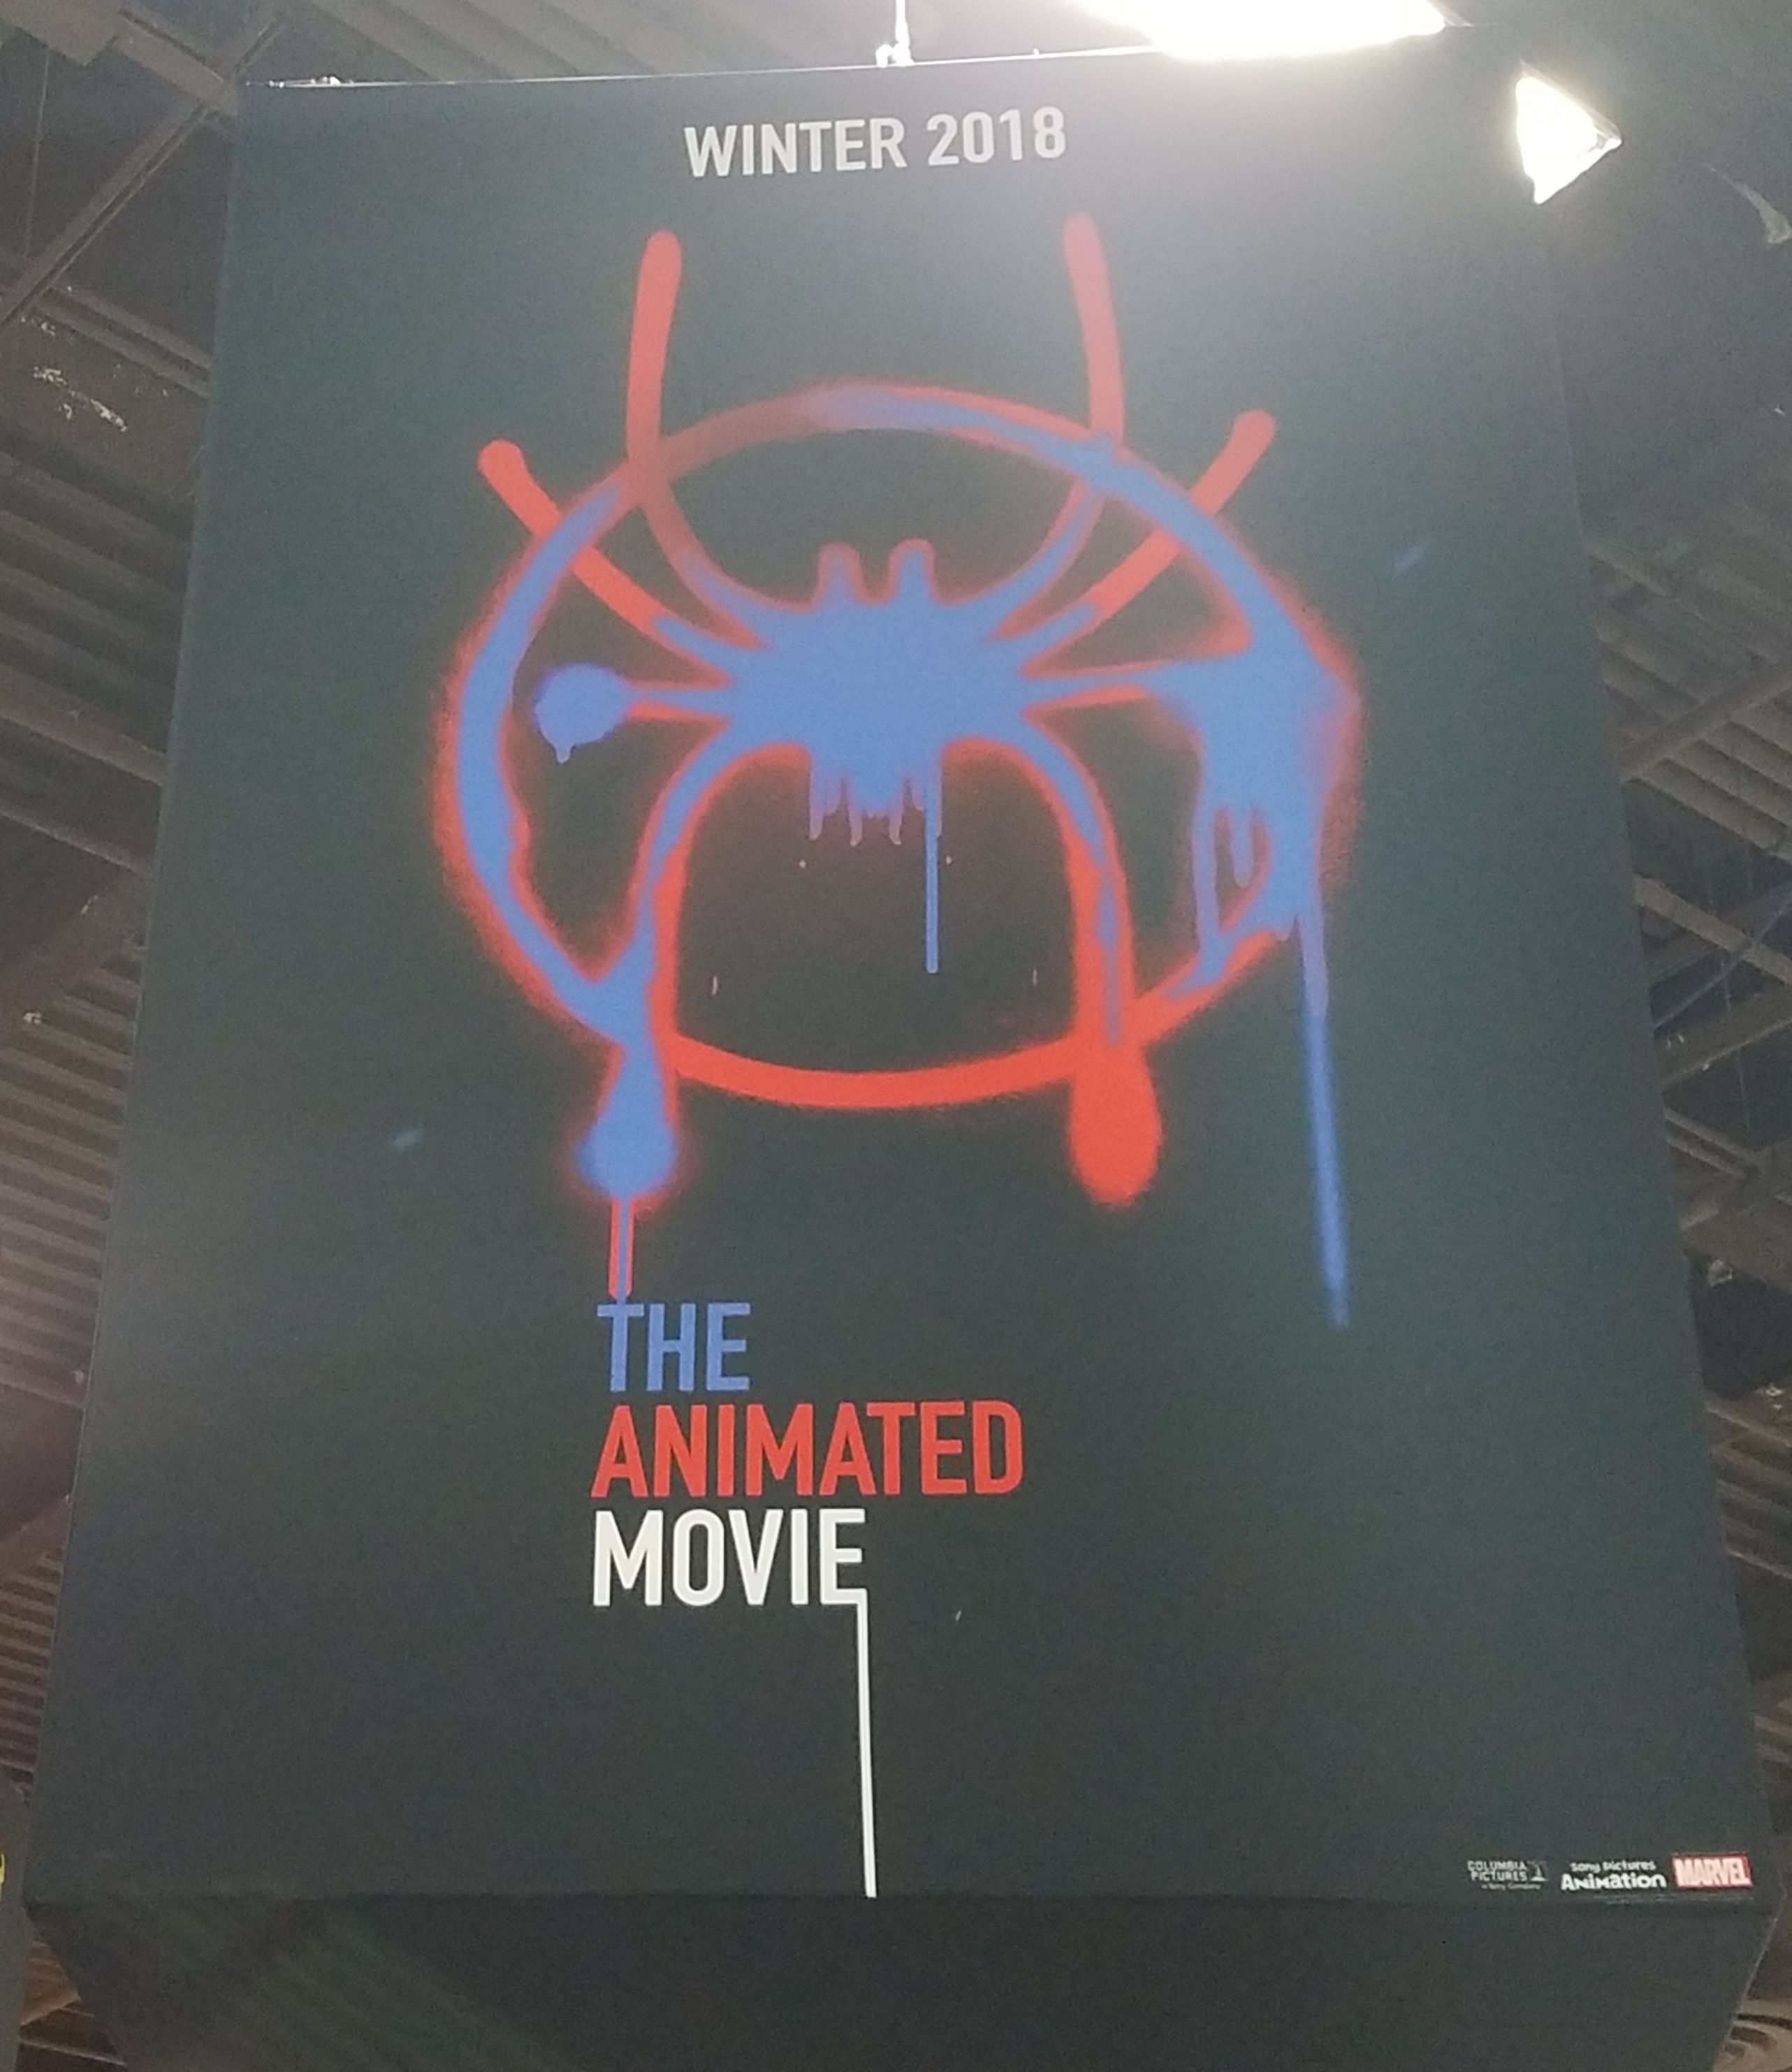 spider-man-animated-movie-banner-expo.jp